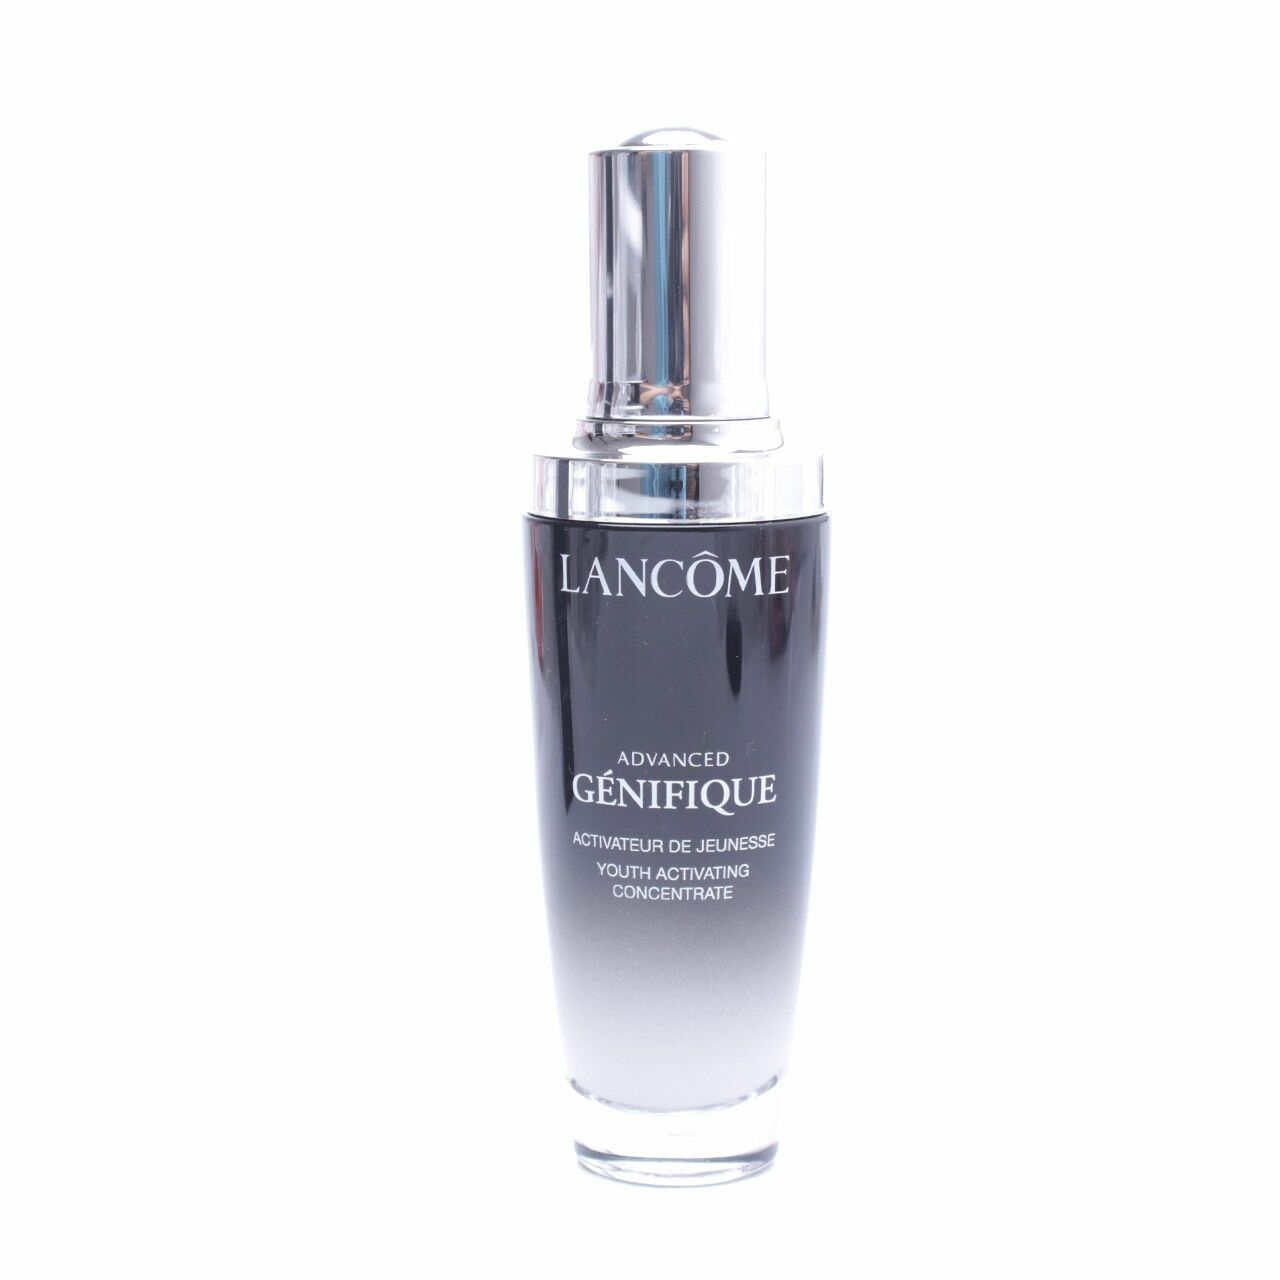 Lancome Genifique Youth Activating Concentrate Skin Care